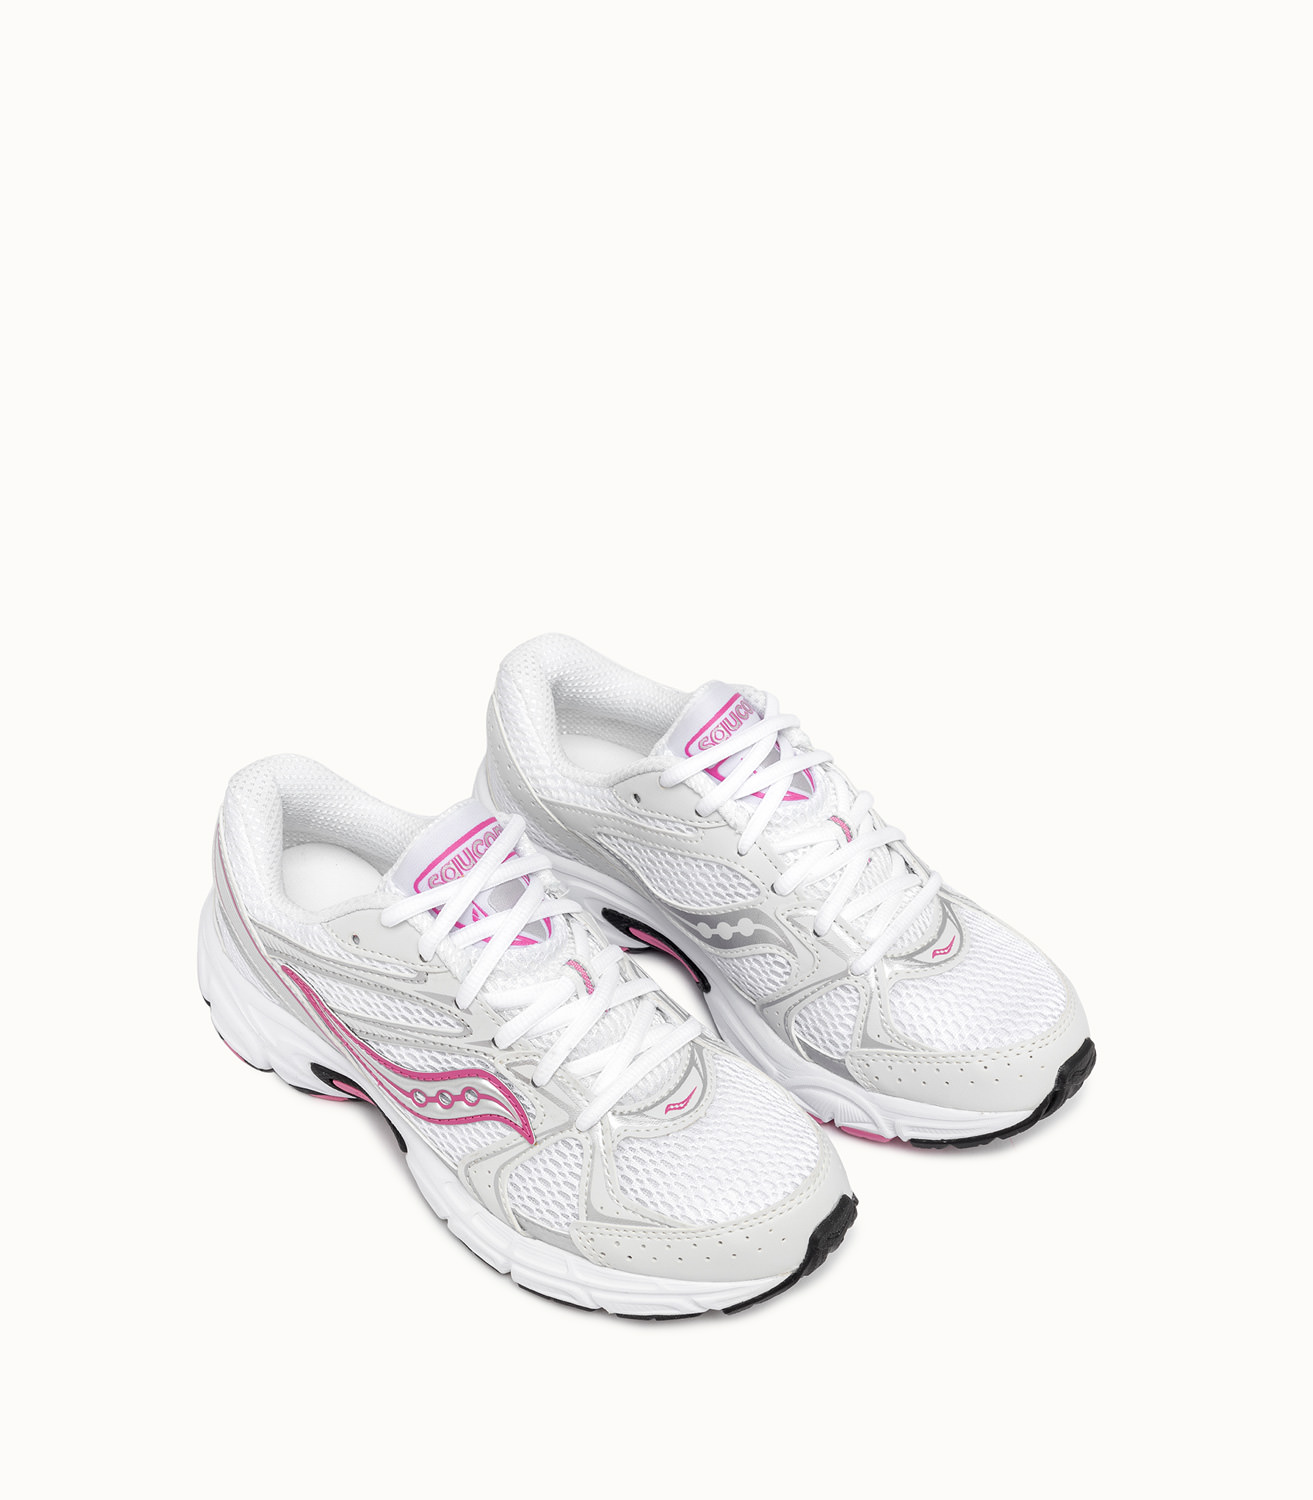 SAUCONY RIDE MILLENNIUM SNEAKERS COLOR WHITE PINK | Playground